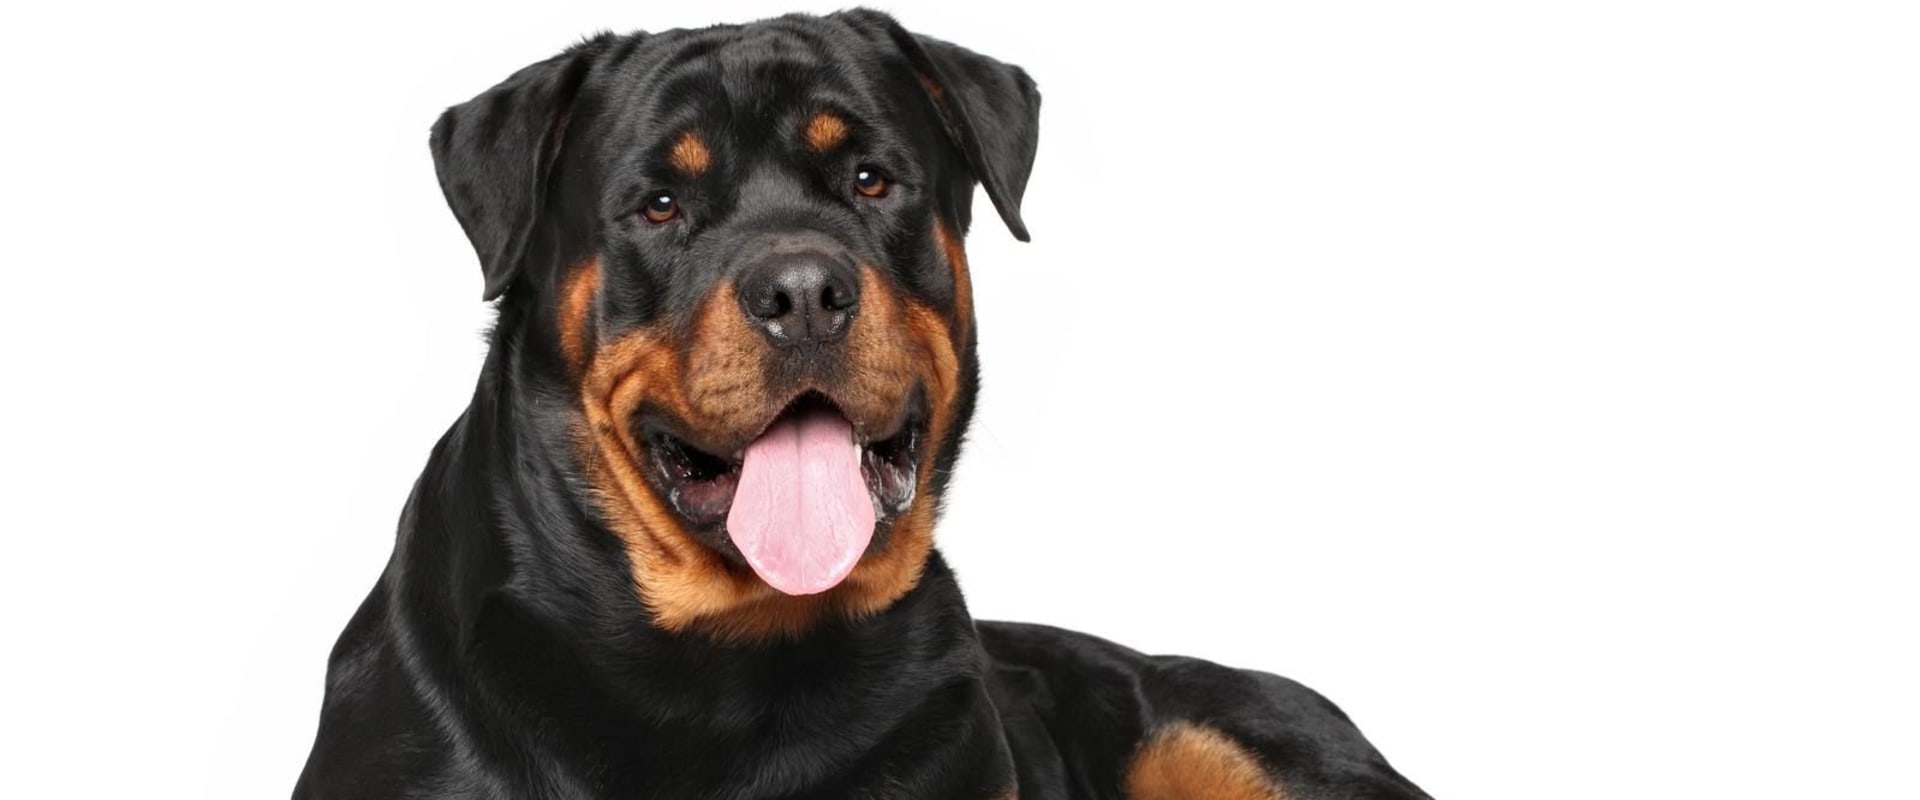 What is the rottweiler best at?